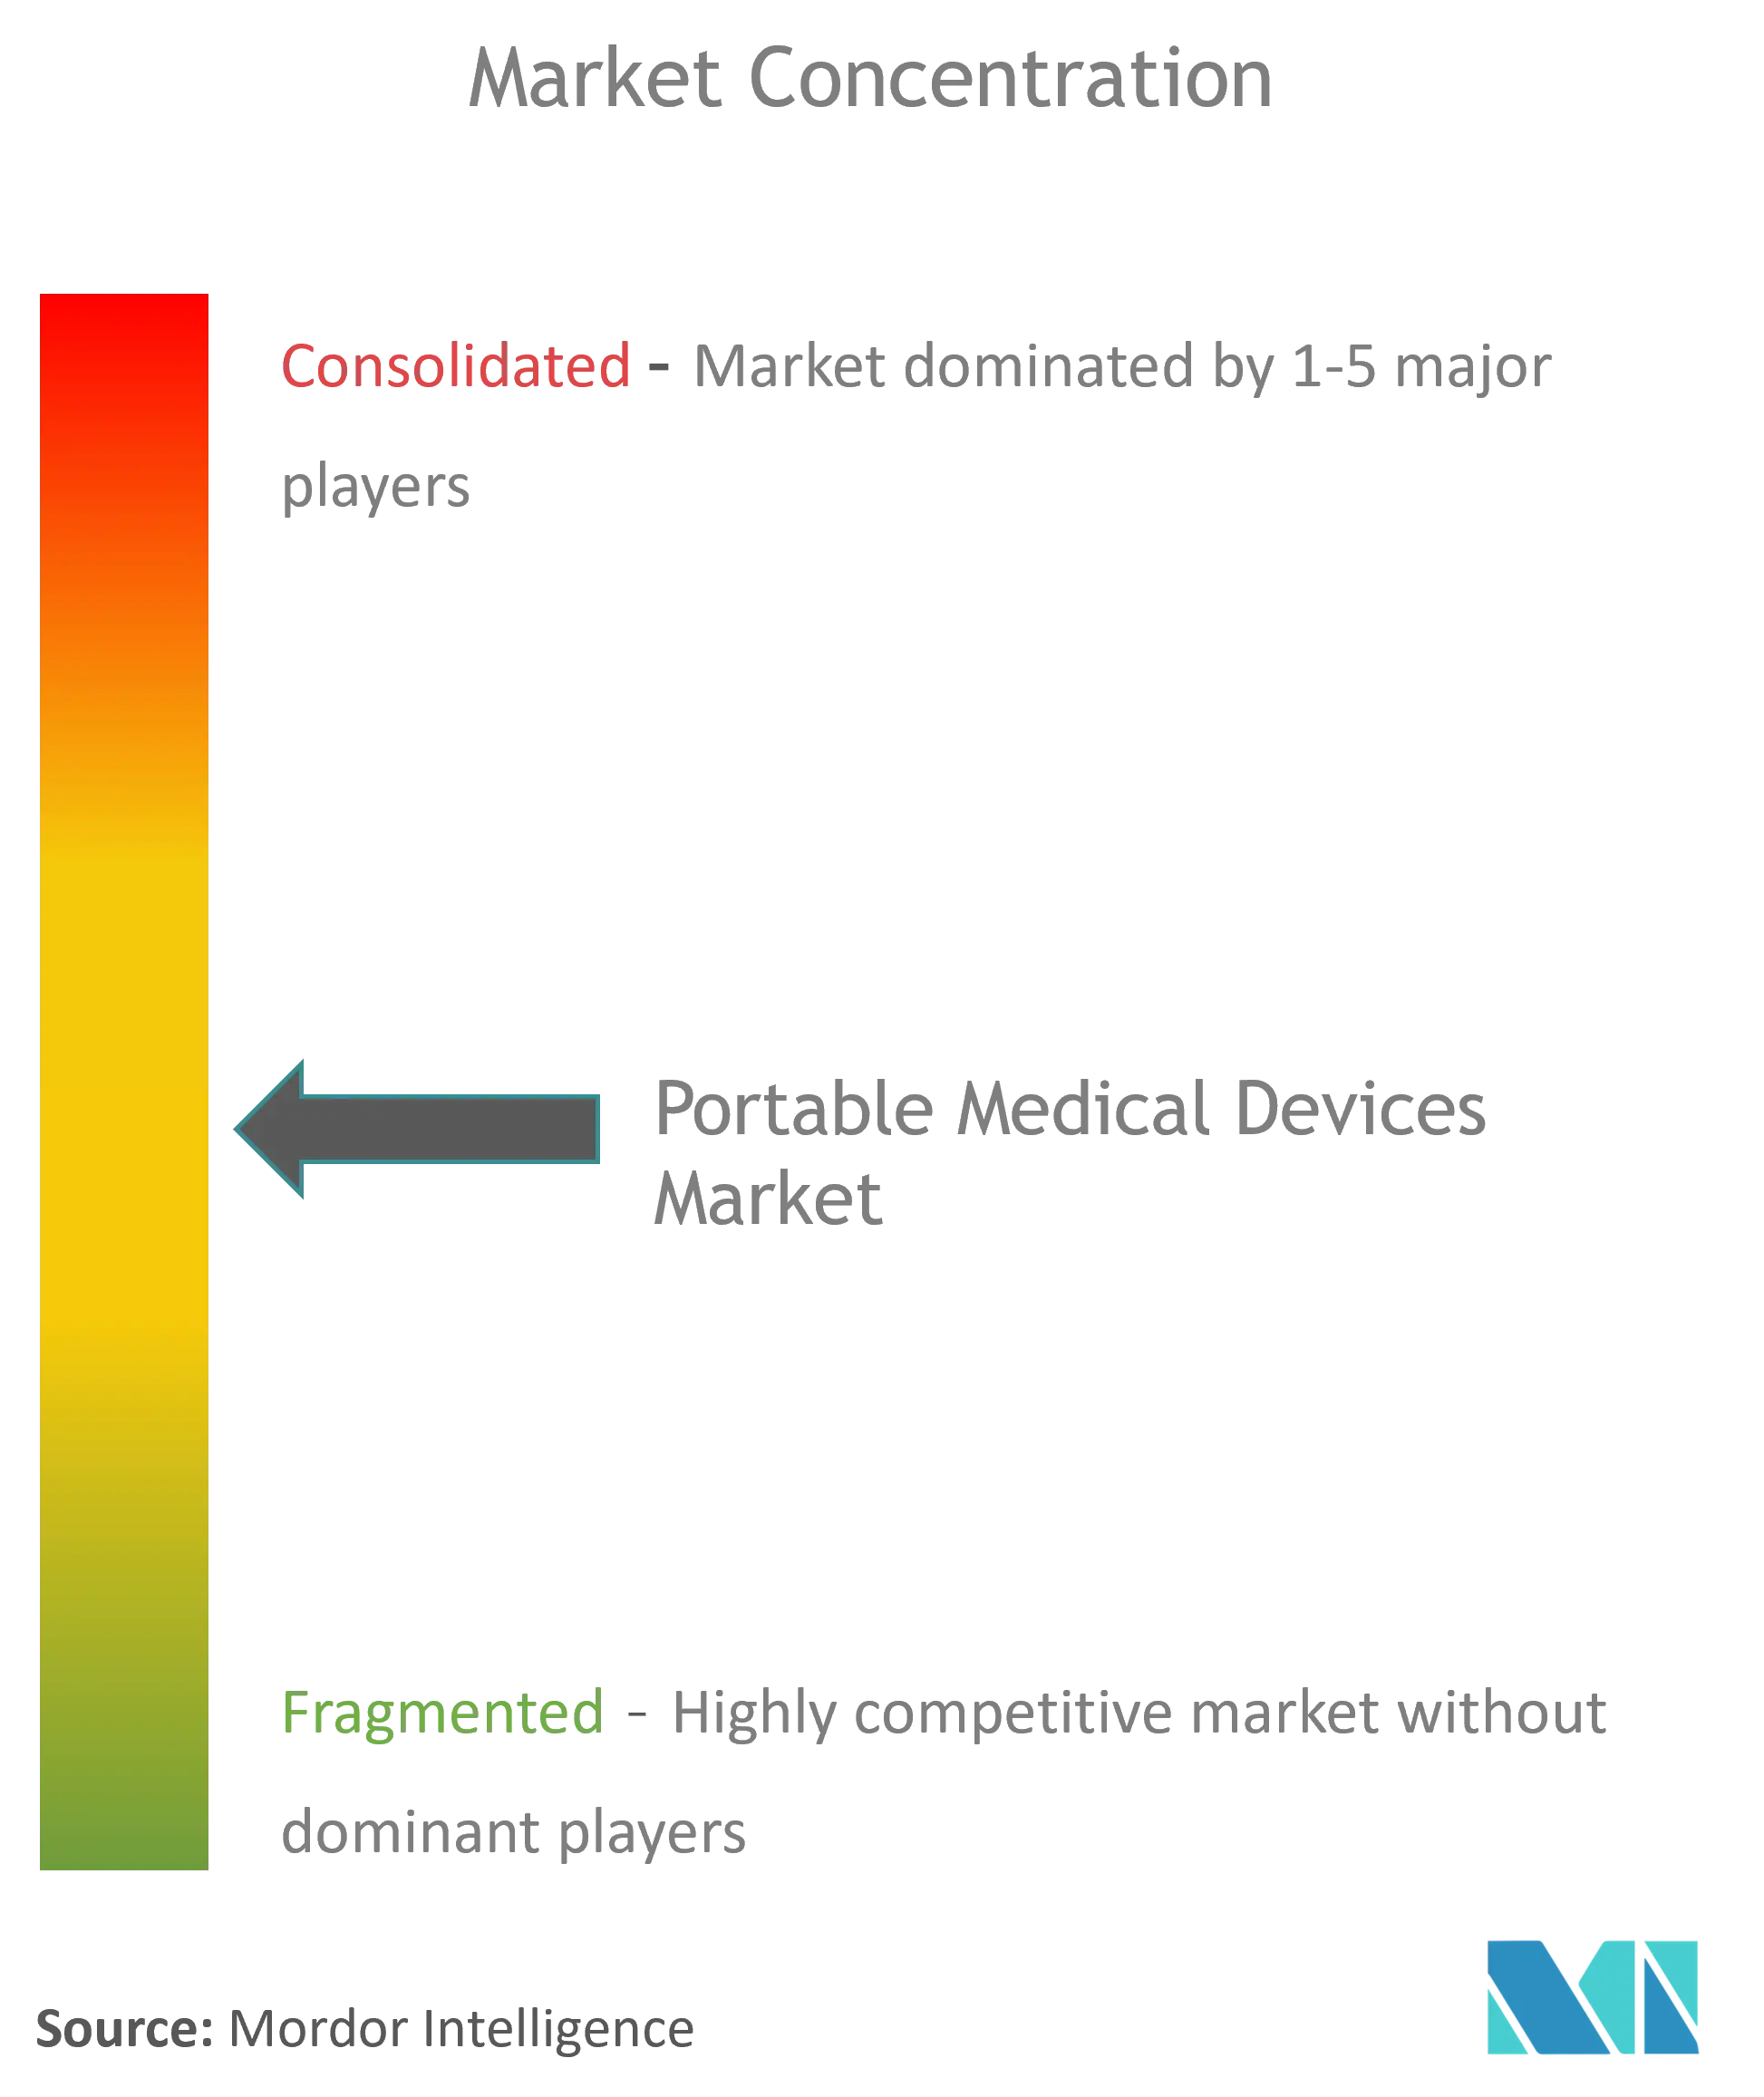 Portable Medical Devices Market Concentration